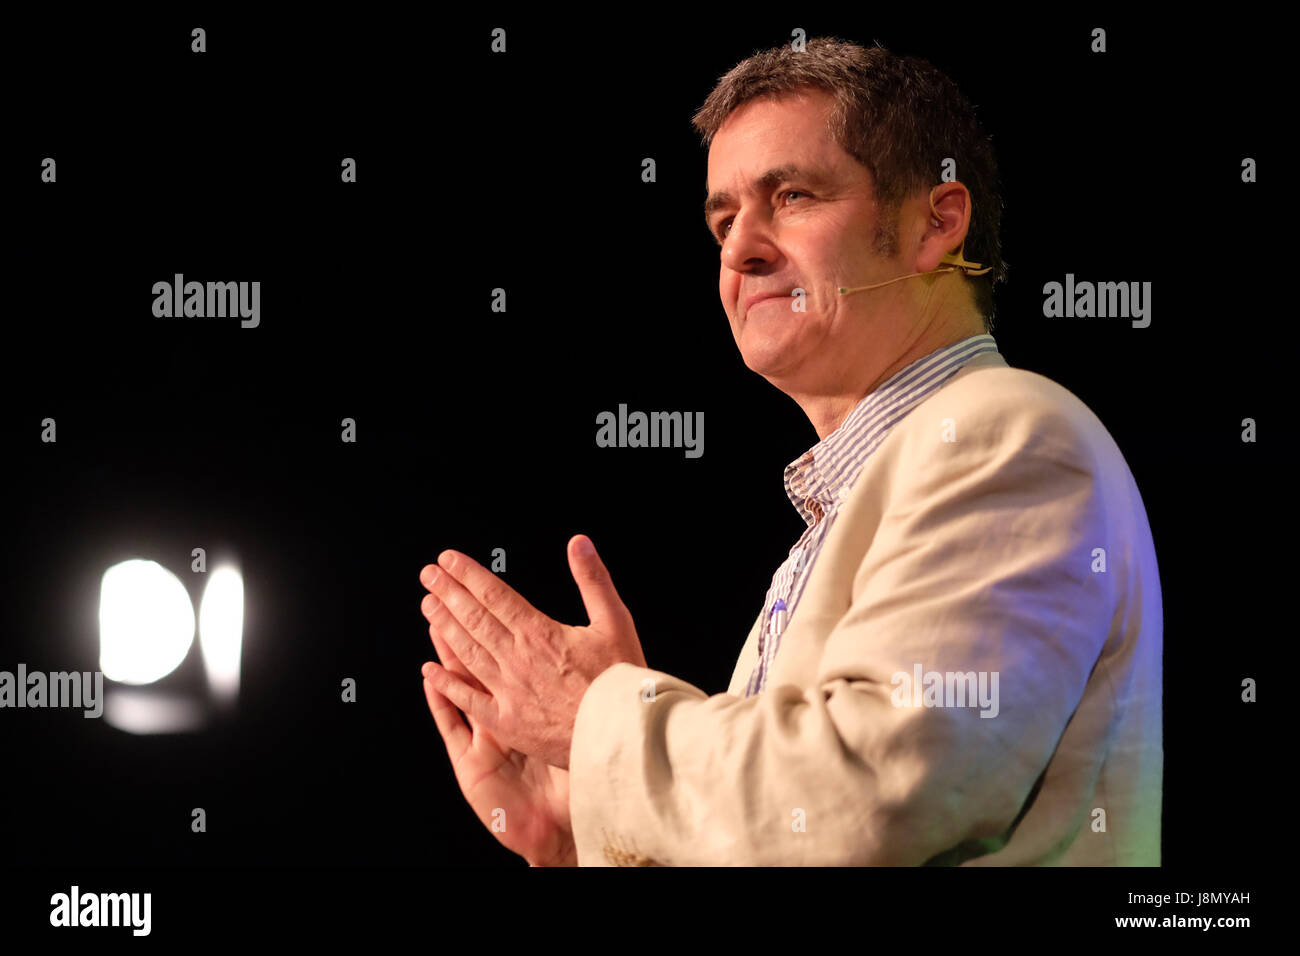 Hay Festival 2017 - Hay on Wye, Wales, UK - May 2017 - Historian and author Giles Tremlett on stage at the Hay Festival talking about his latest book Isabelle of Castile - Europe's First Great Queen - the Hay Festival celebrates its 30th anniversary in 2017 -  Steven May / Alamy Live News Stock Photo